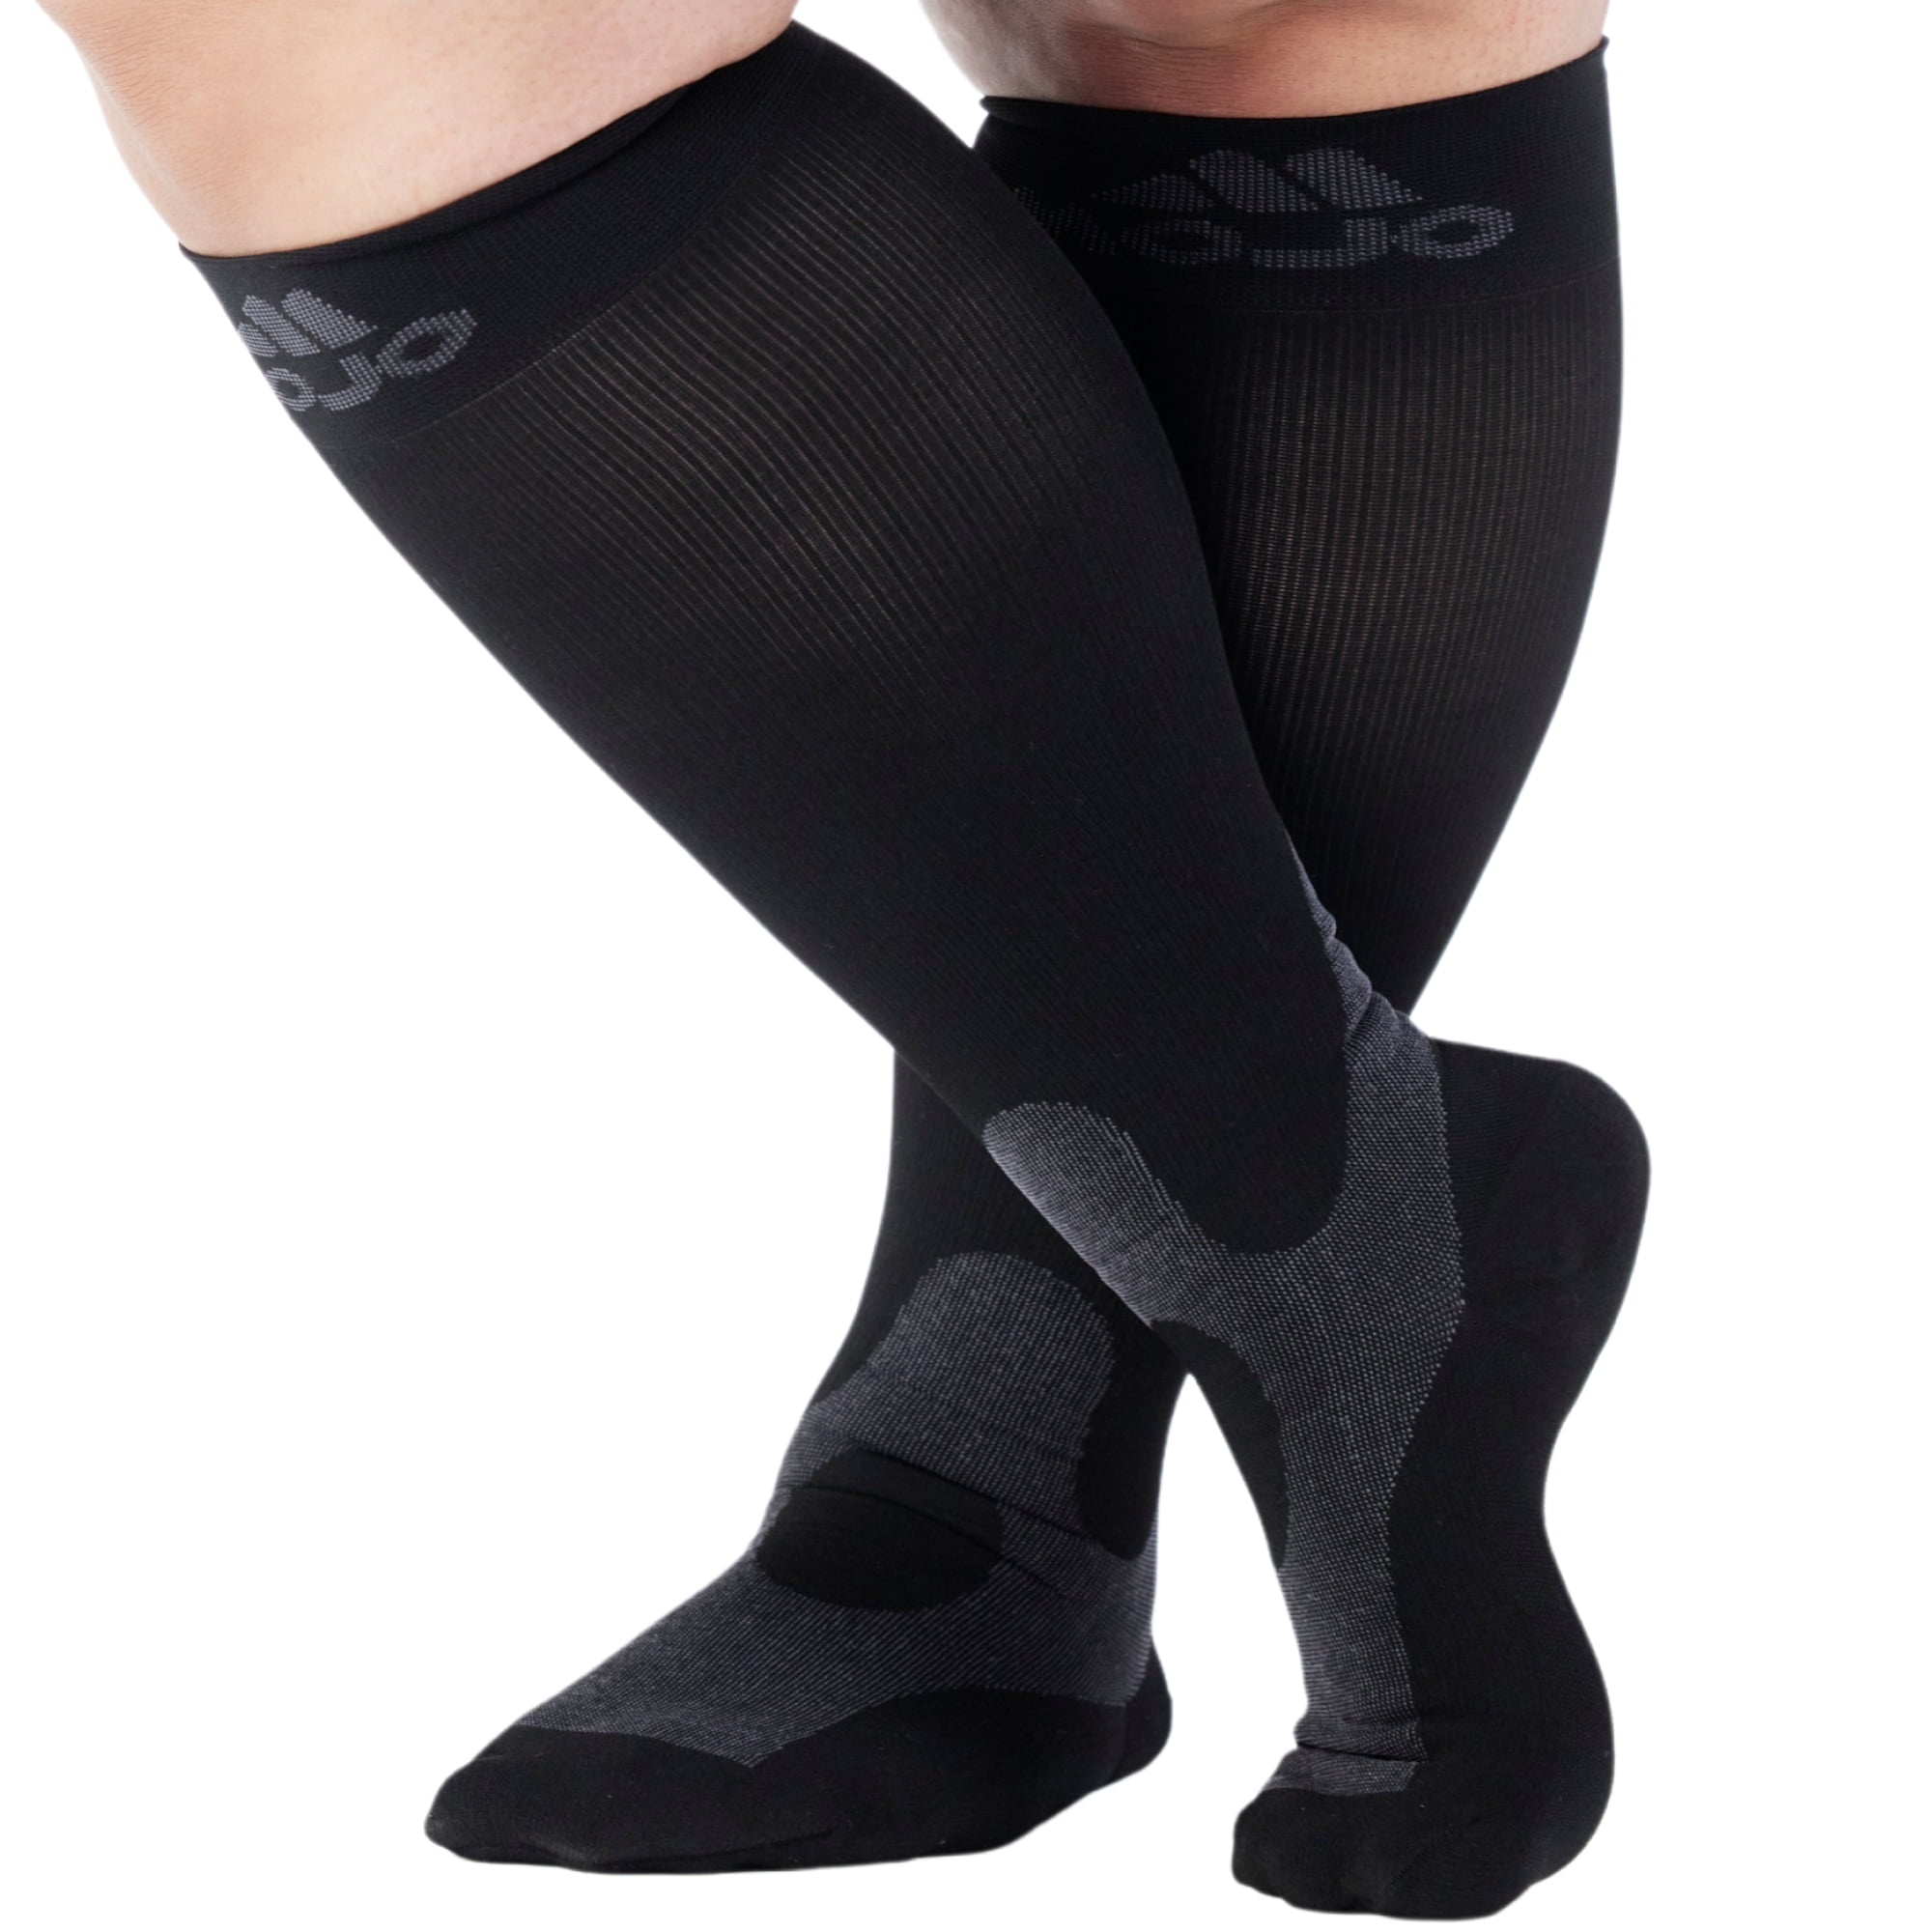 Black Mountain Products Extra Thick Warming Calf Compression Sleeve -  Therapeutic Warming Sensation - Black, Medium 